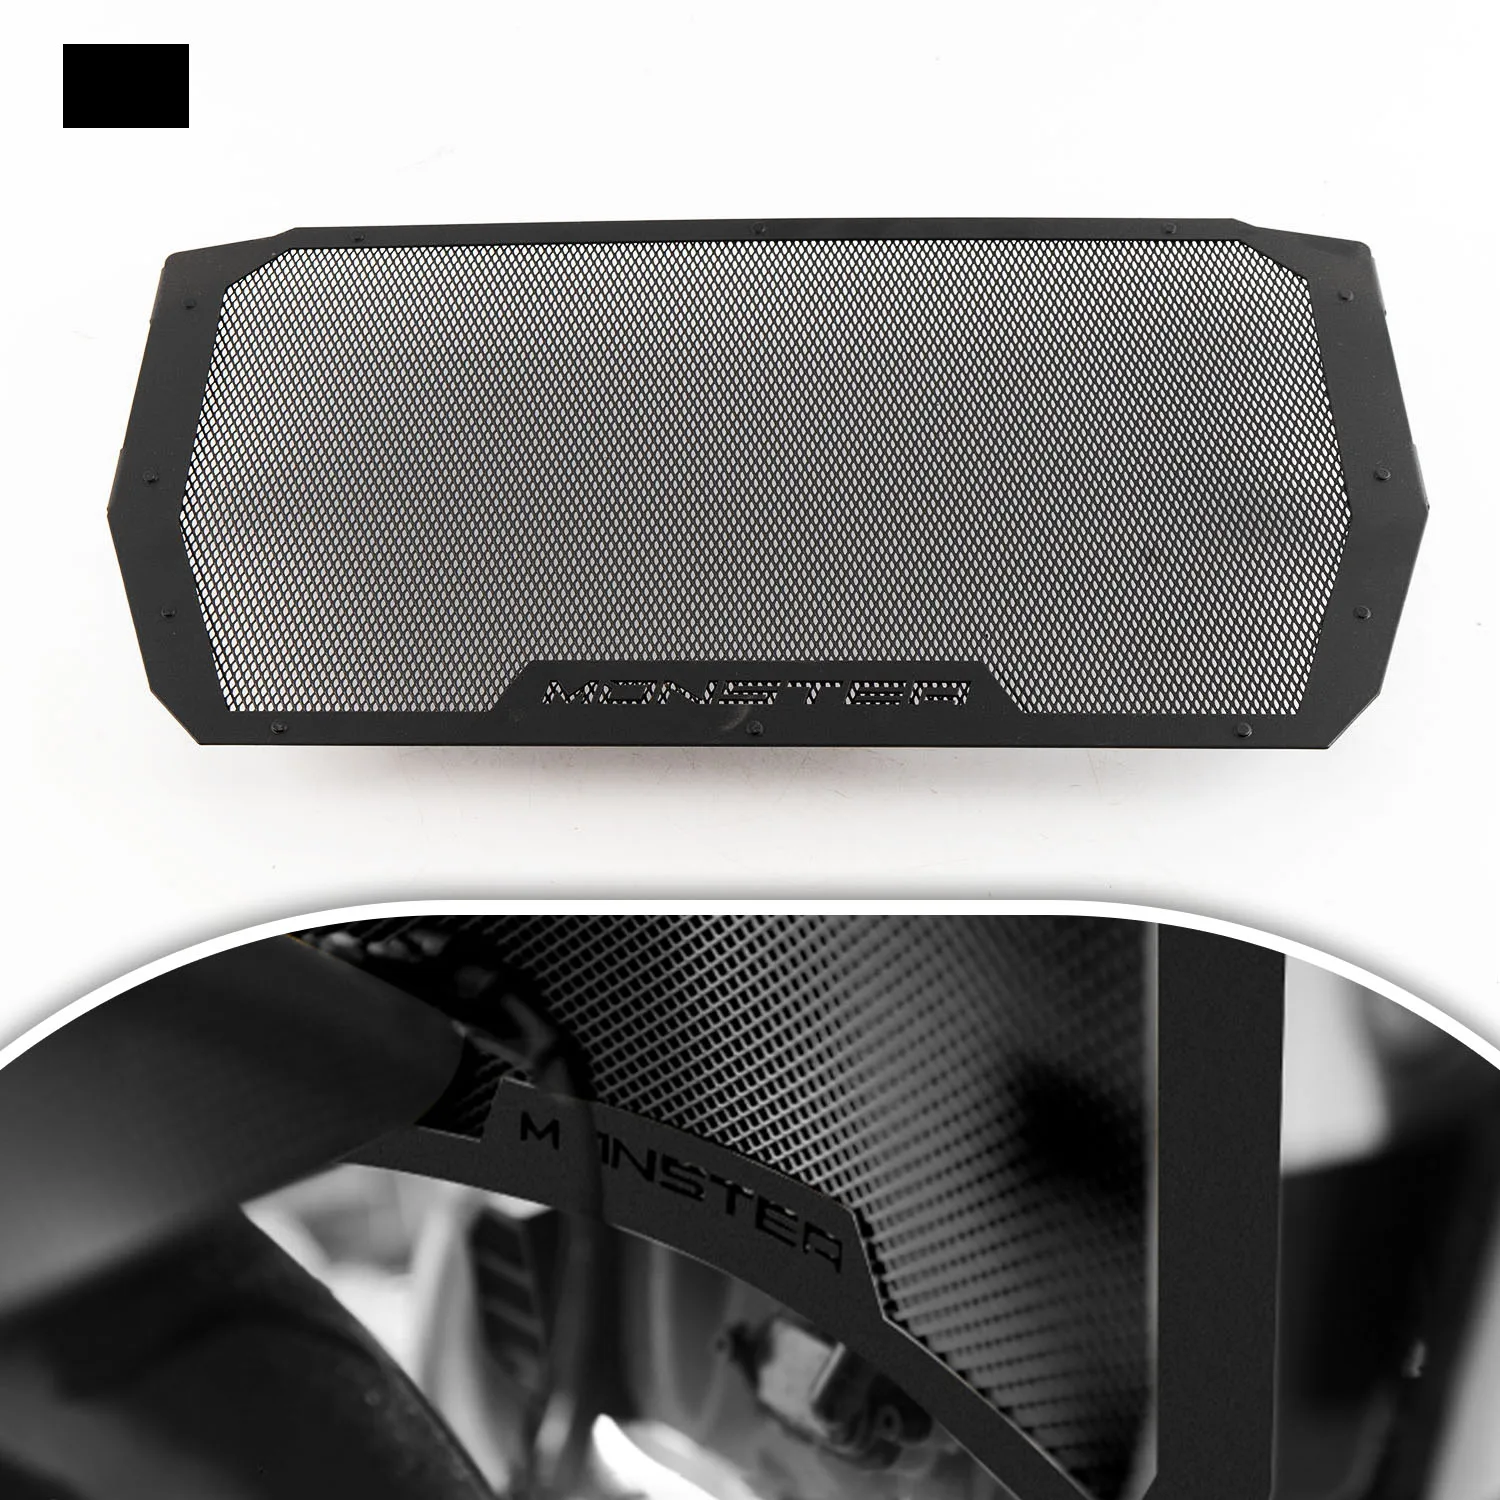 

For Ducati Monster821 Monster 821 2014-2020 Monster1200 Monster 1200 2015-2018 Motorcycle Radiator Grille Guard Cover Protector